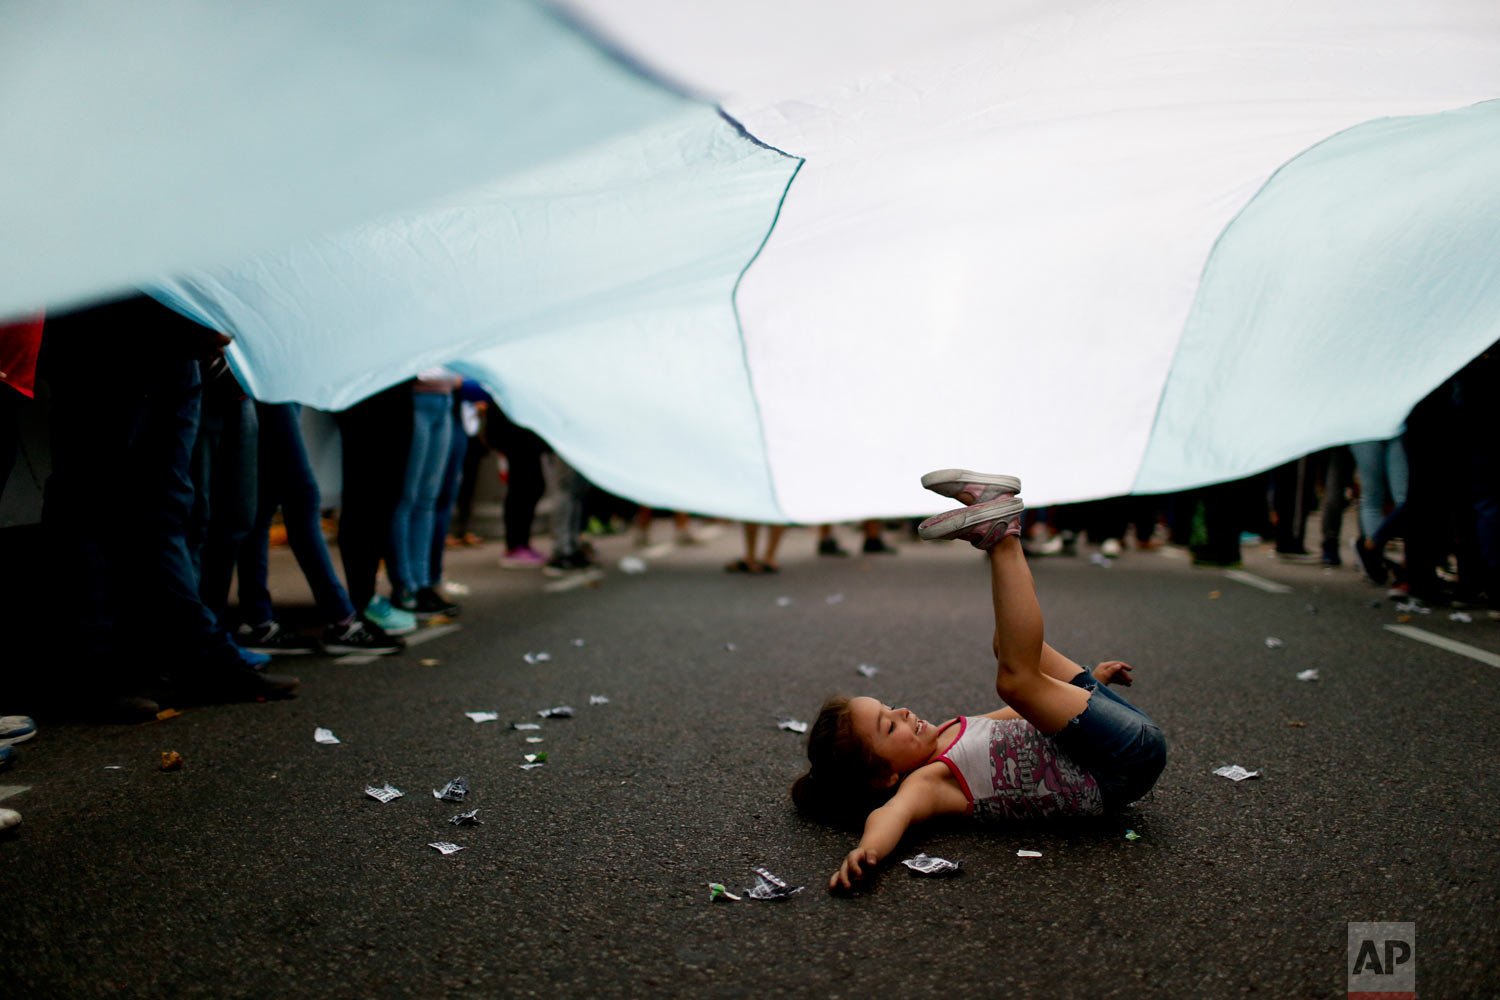  A girl plays under an Argentine flag as demonstrators protest the increase in public service fees in Buenos Aires, Argentina, Jan. 10, 2019. (AP Photo/Natacha Pisarenko) 